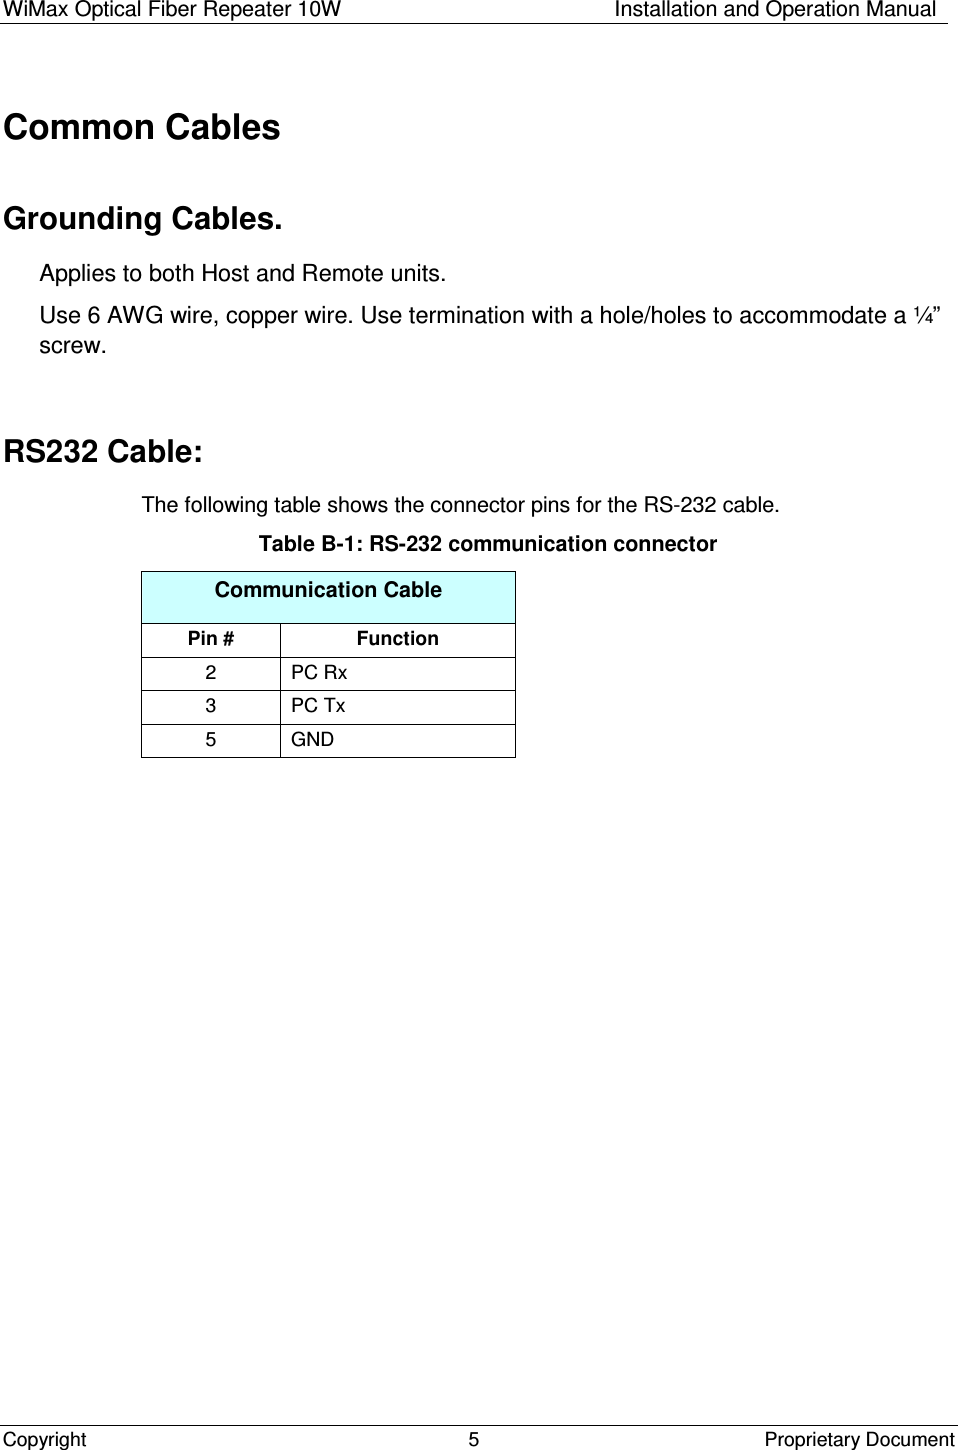 WiMax Optical Fiber Repeater 10W   Installation and Operation Manual Copyright    Proprietary Document  5  Common Cables Grounding Cables. Applies to both Host and Remote units. Use 6 AWG wire, copper wire. Use termination with a hole/holes to accommodate a ¼” screw.  RS232 Cable: The following table shows the connector pins for the RS-232 cable. Table B-1: RS-232 communication connector Communication Cable Pin #  Function 2  PC Rx 3  PC Tx 5  GND  